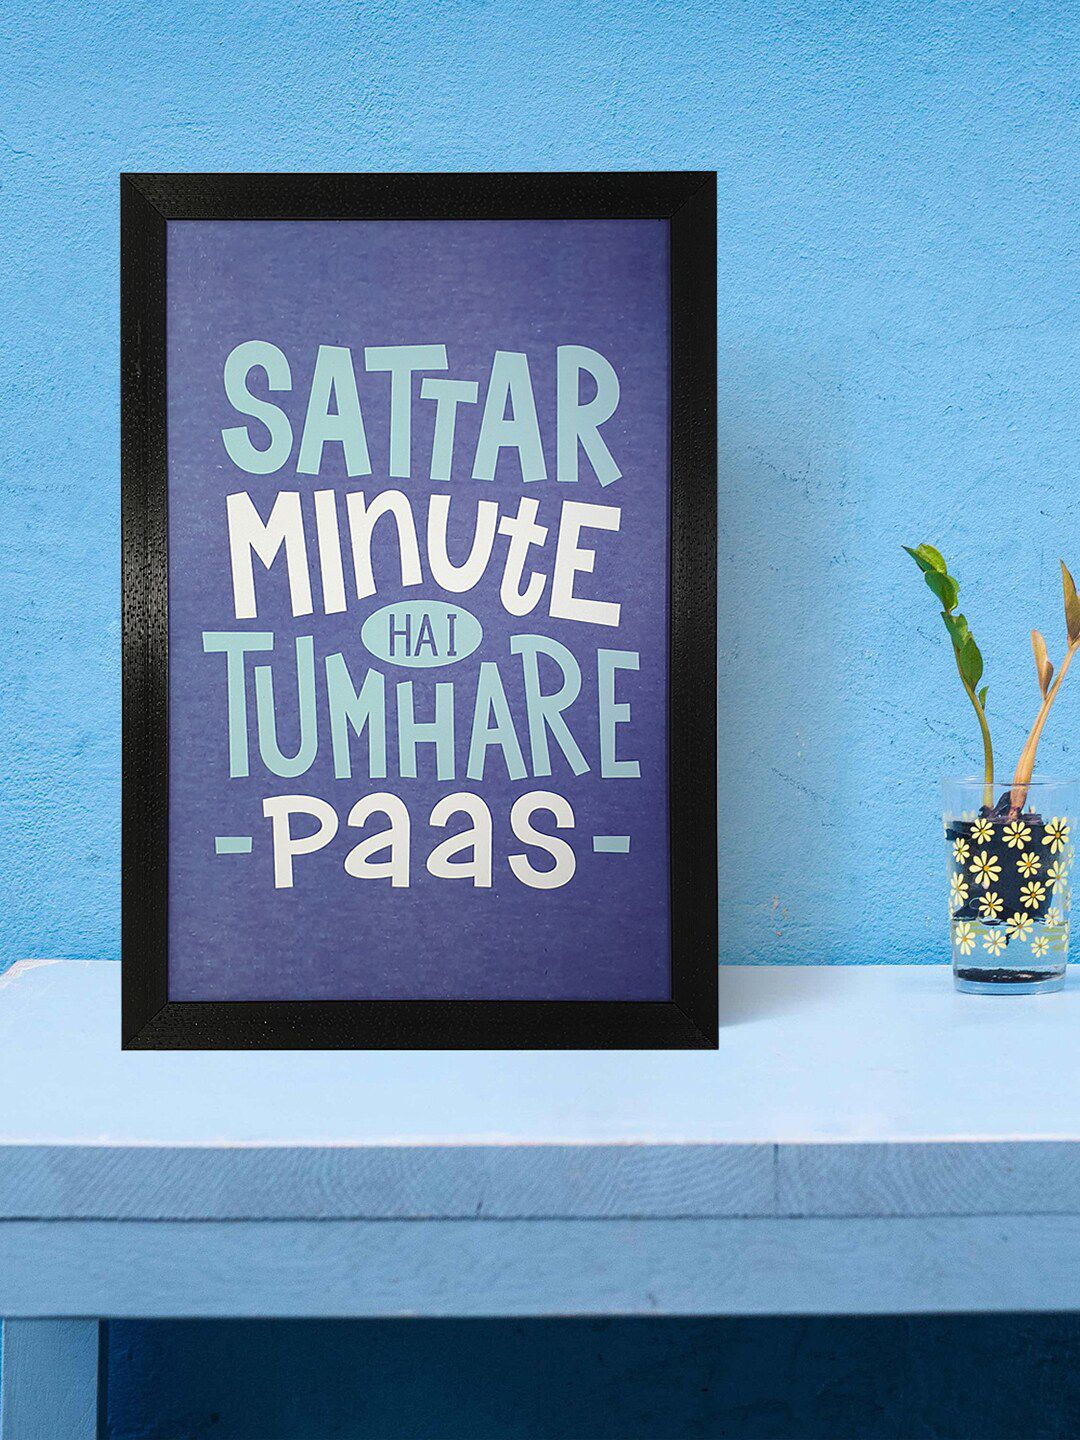 Gallery99 "Sattar Minute Hai Tumhare Paas" Quotes Texture Paper Framed Wall Art Price in India